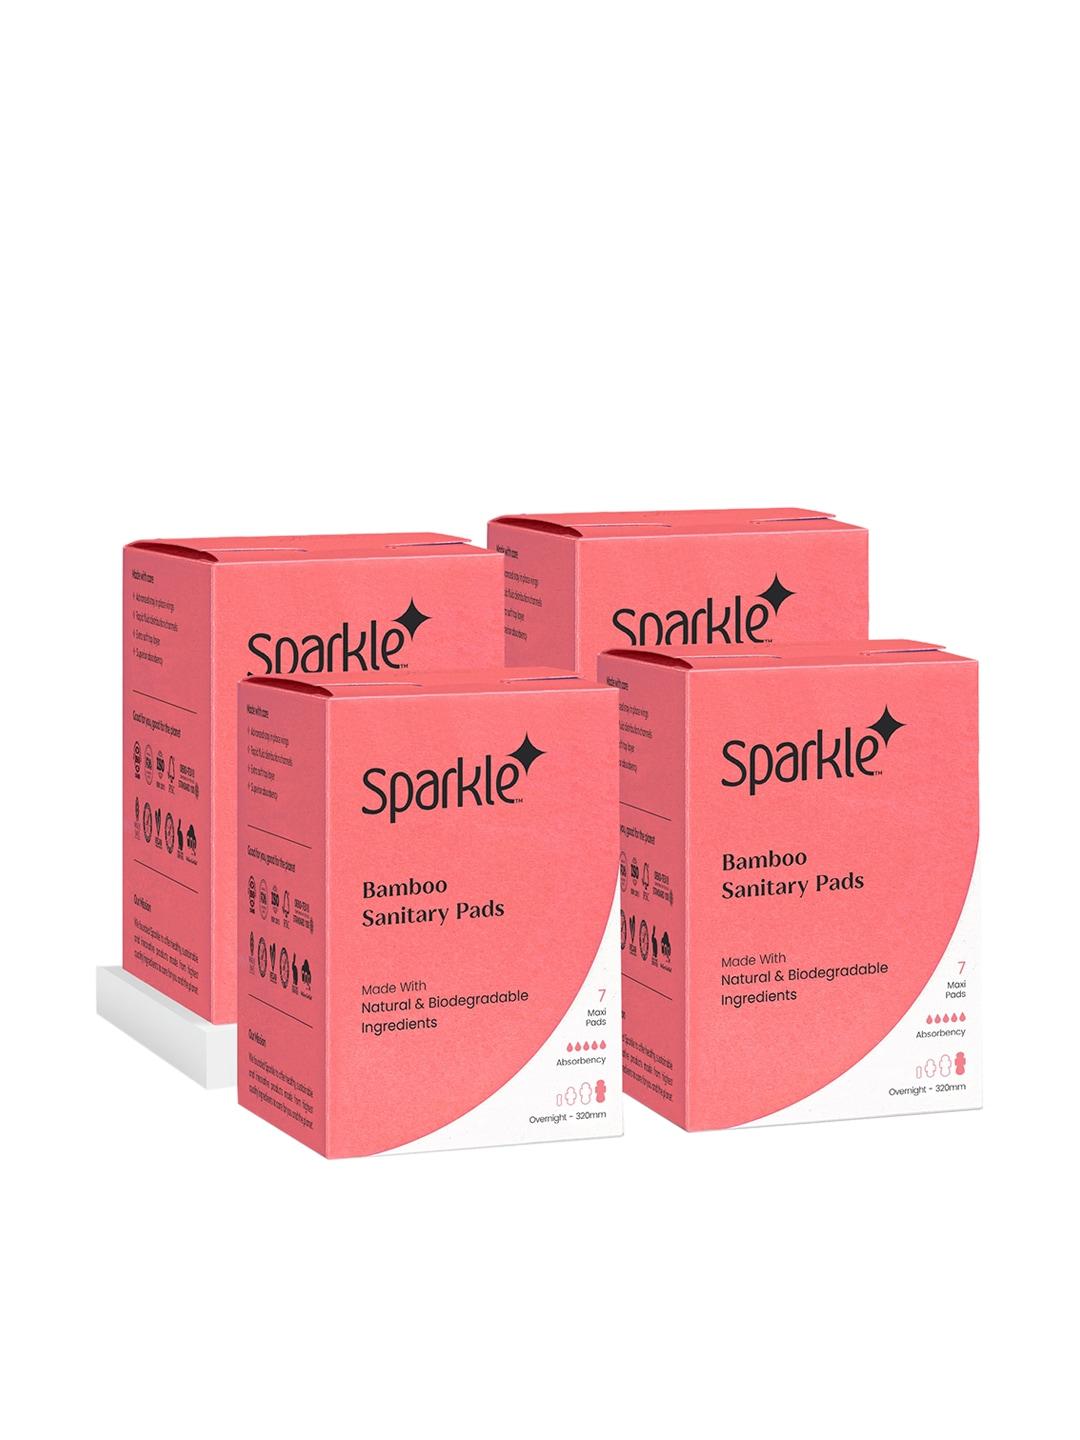 Sparkle Set of 4 Cruelty-Free & Vegan Overnight Bamboo Sanitary Pads - 7 Maxi Pads Each